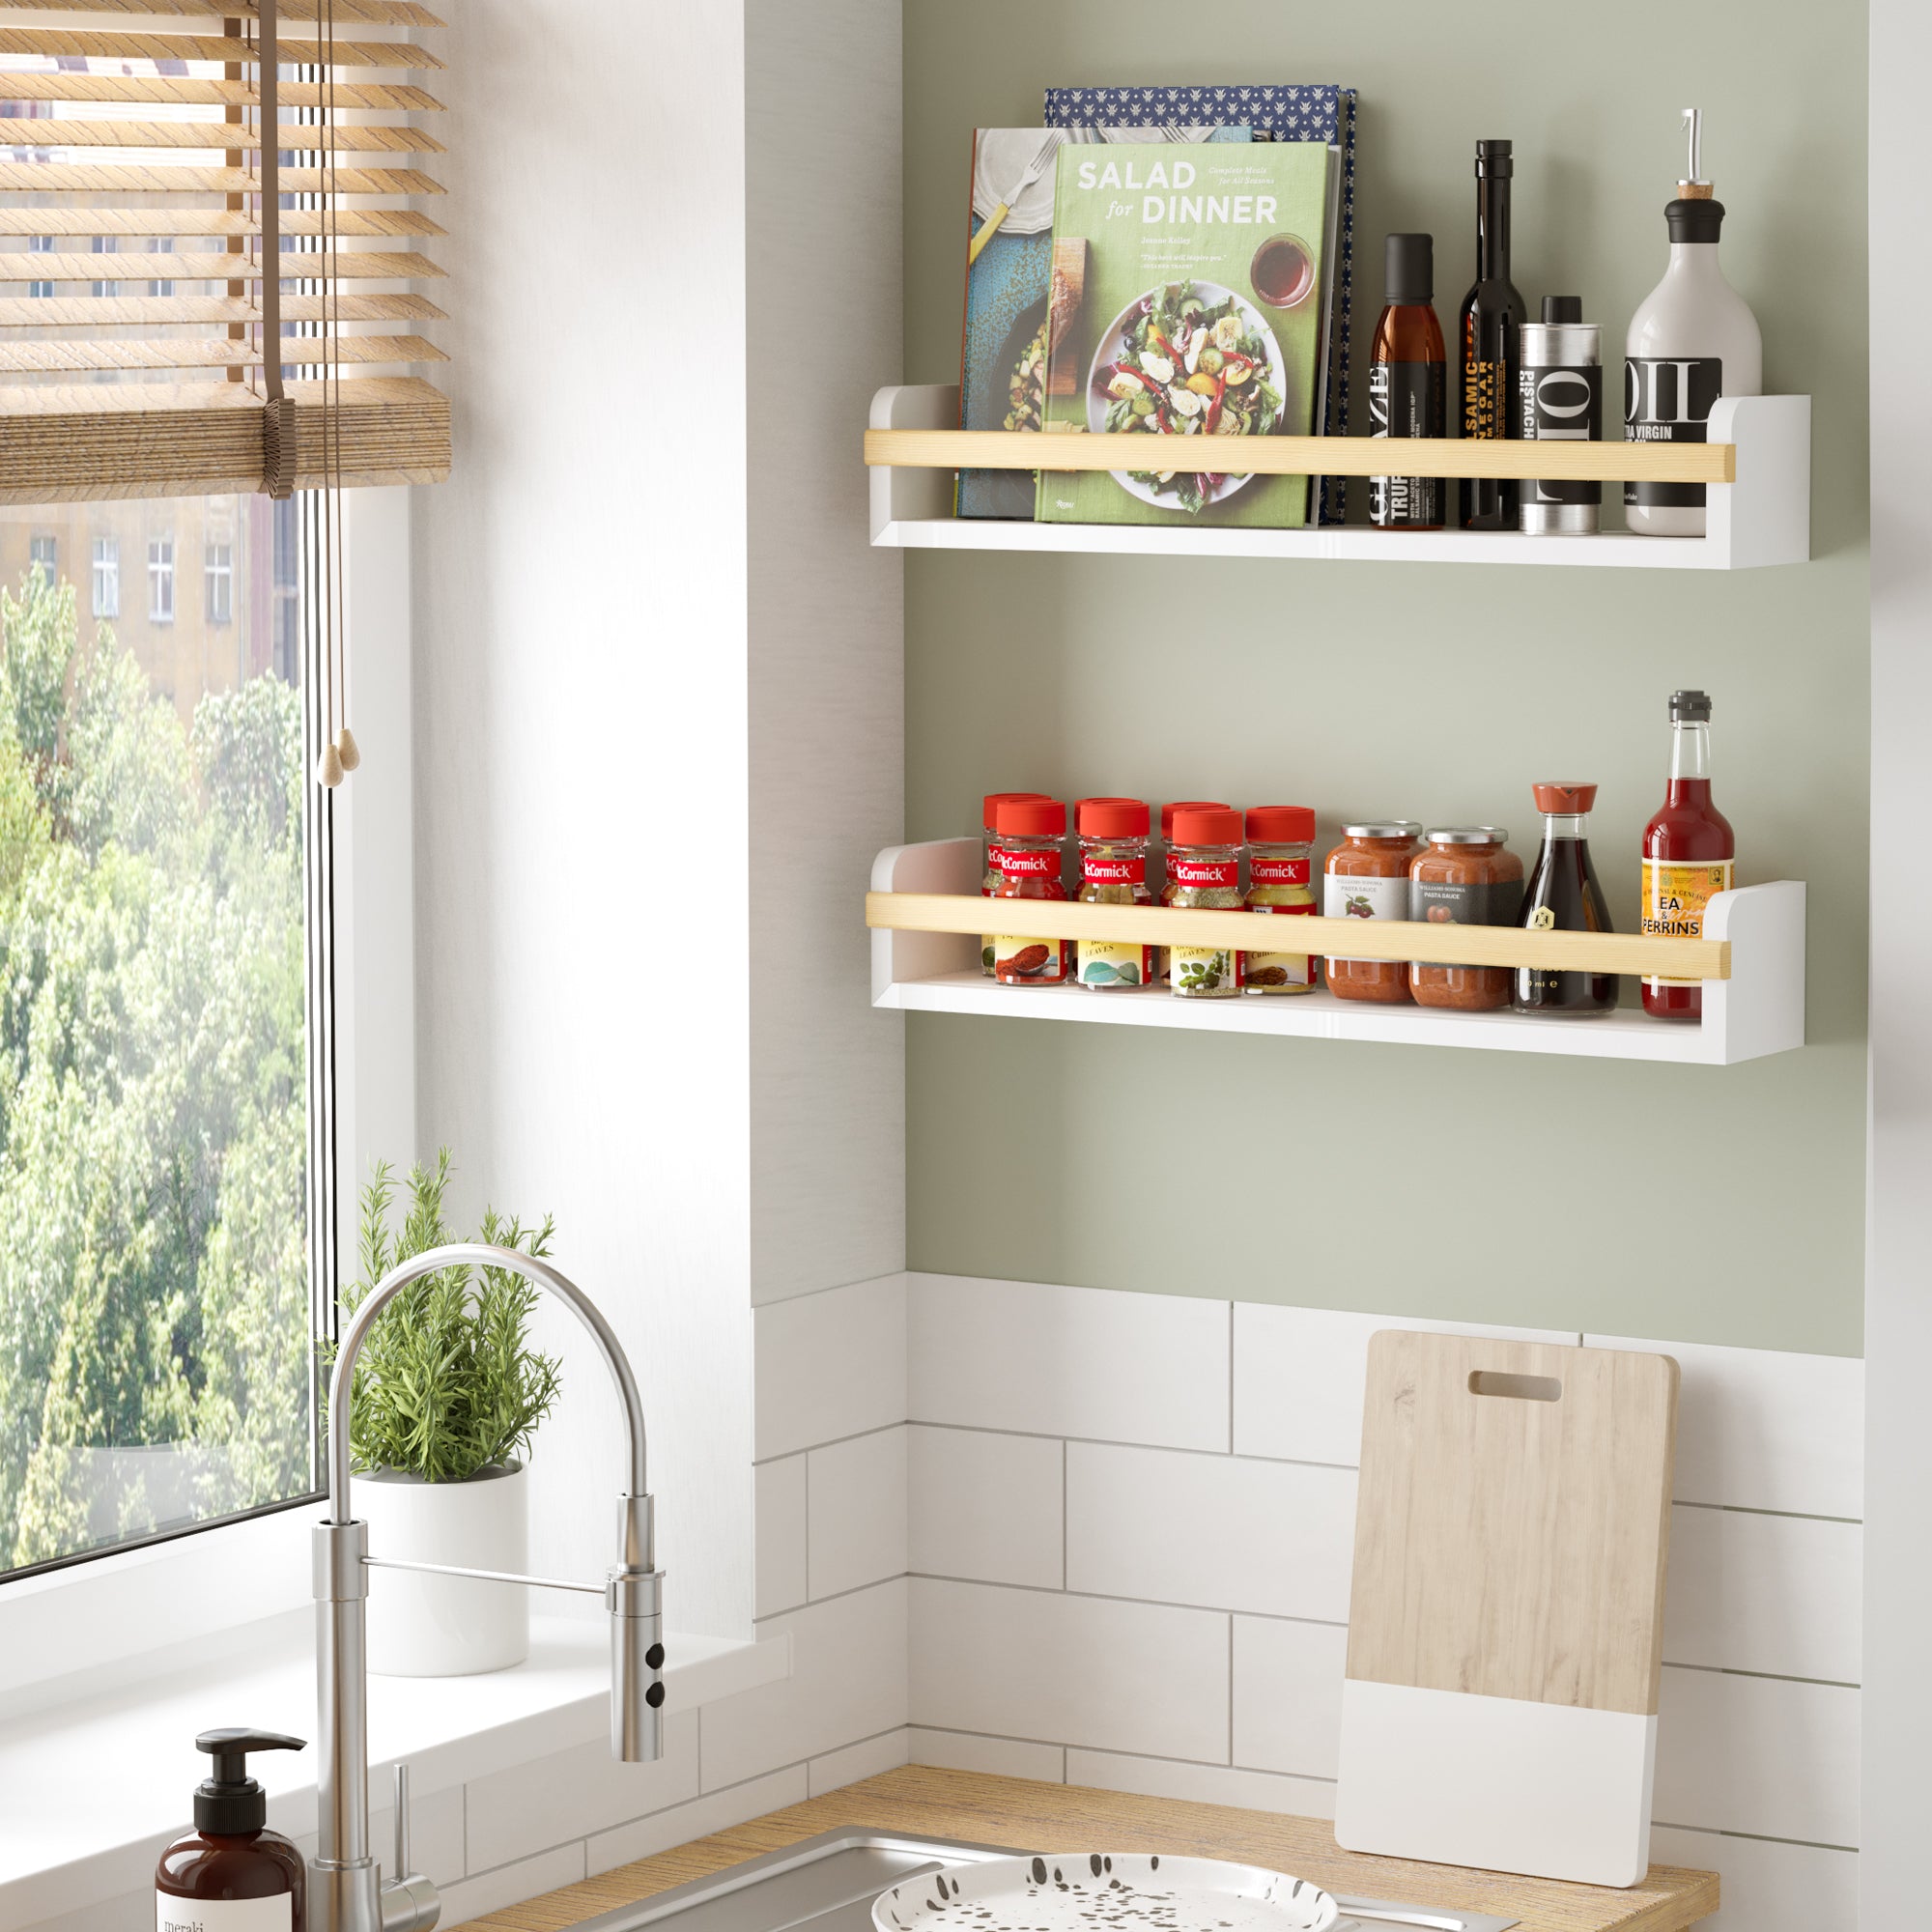 Two white kitchen storage shelves in a kitchen setting, filled with cookbooks, spices, and condiments. Positioned near a window, providing a functional and stylish storage solution for cooking essentials.